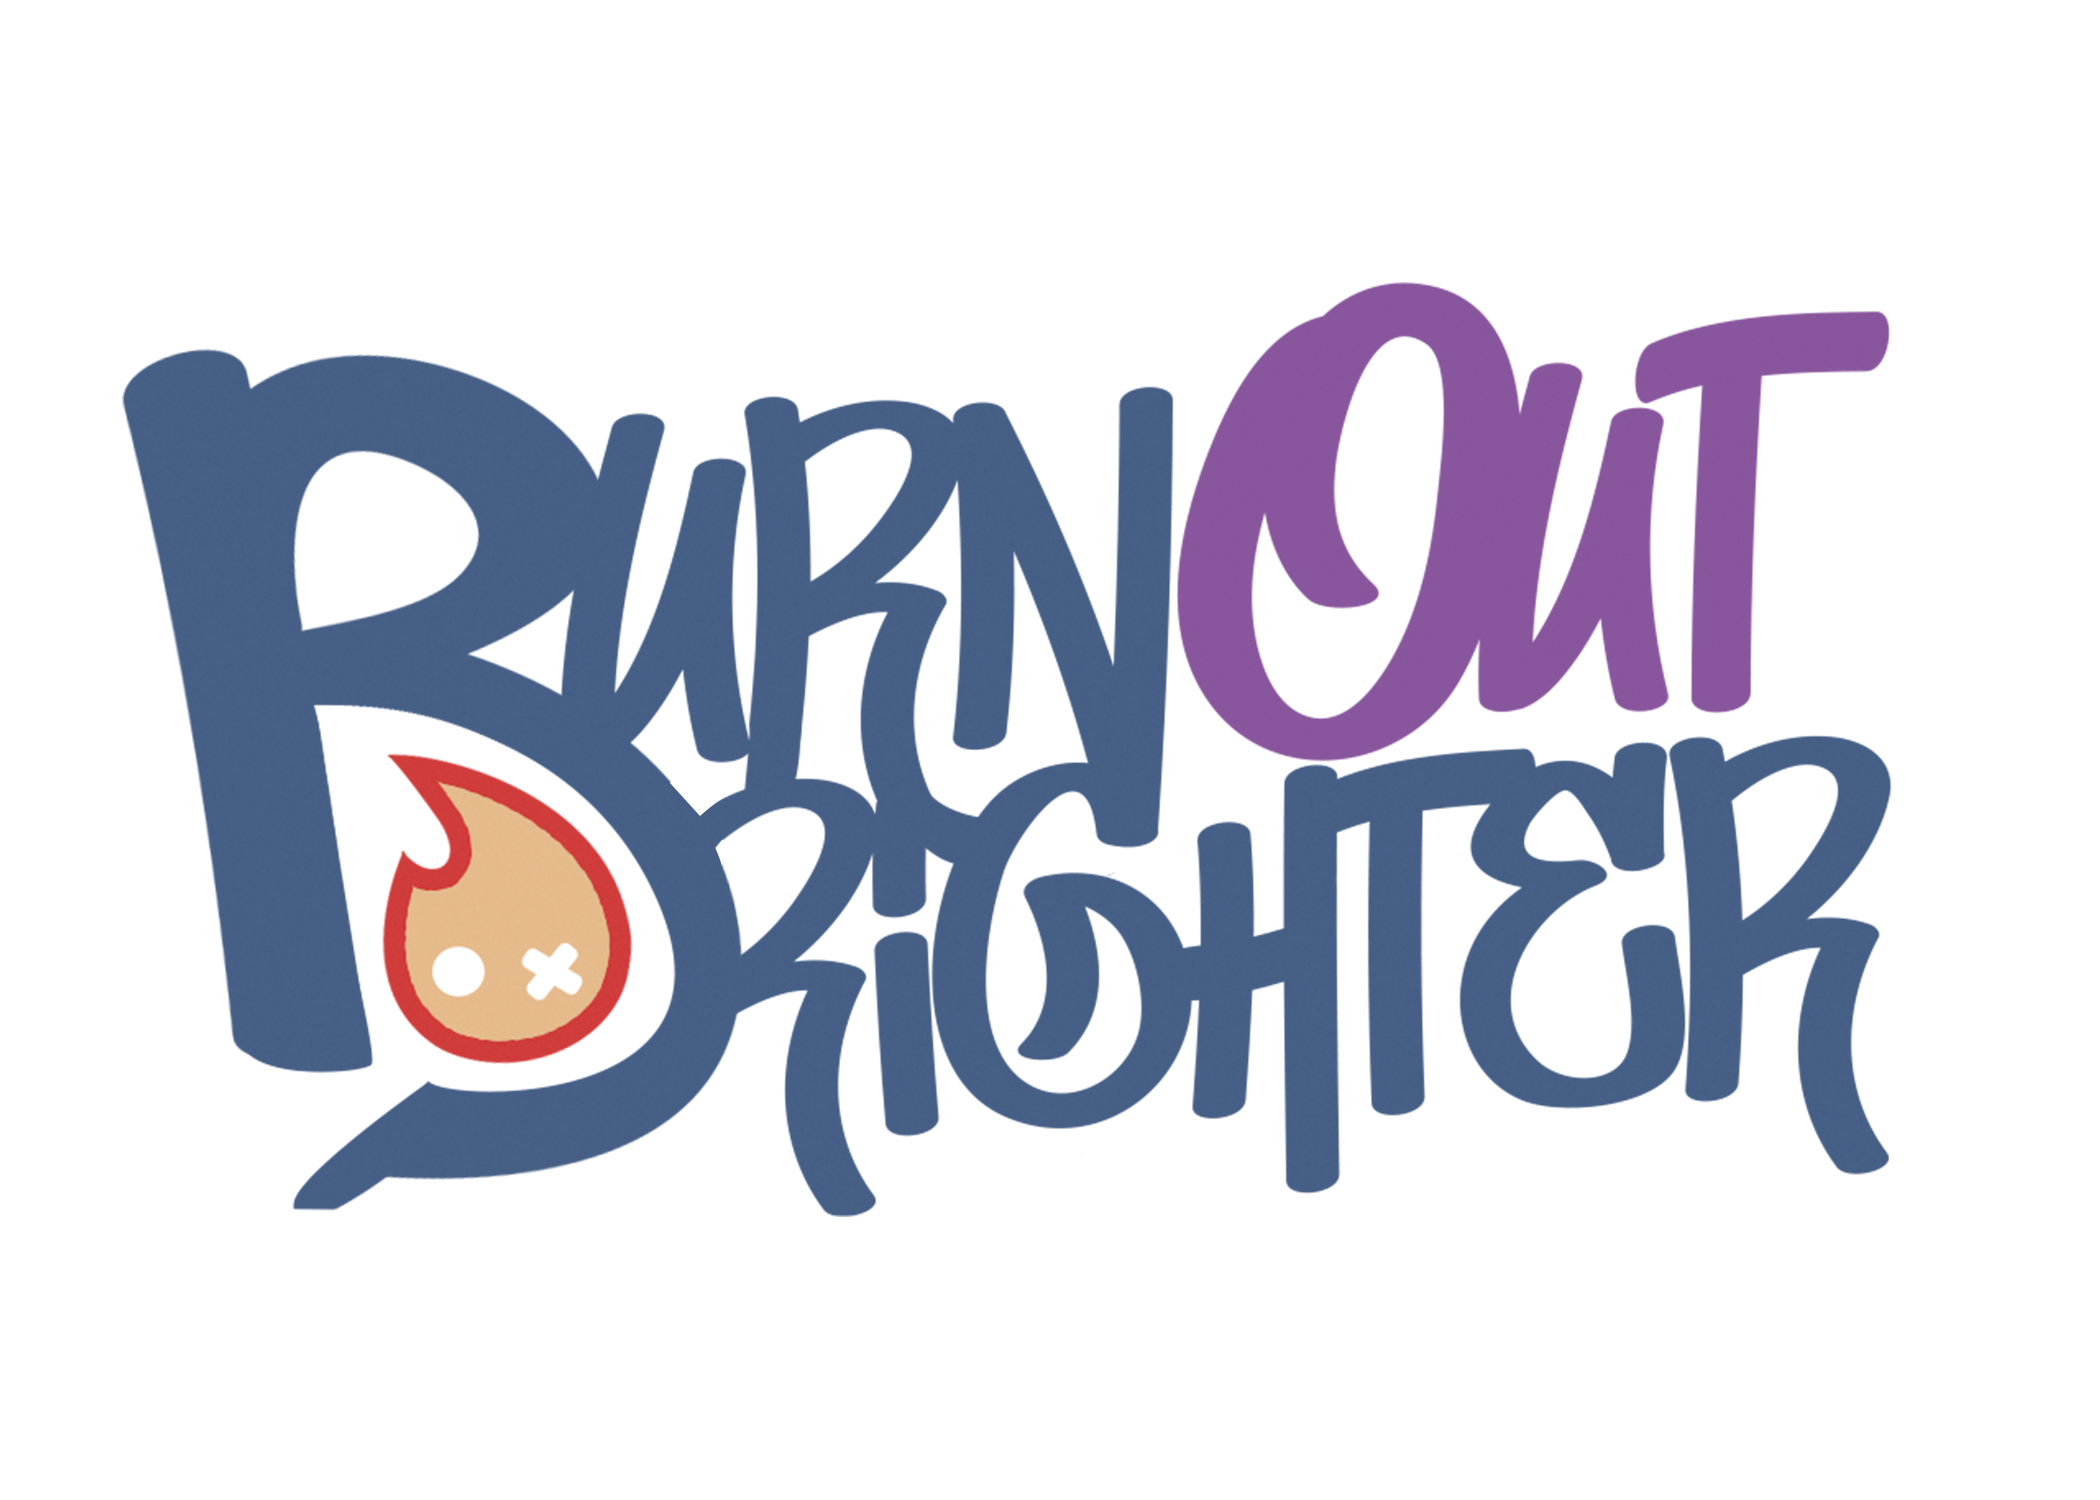 <img src="BurnOutBrighter_BecauseMentalHealthMatters_01.png" alt="Burn Out Brighter is a podcast that focuses on gaming, mental health, social justice issues, and everything in between">